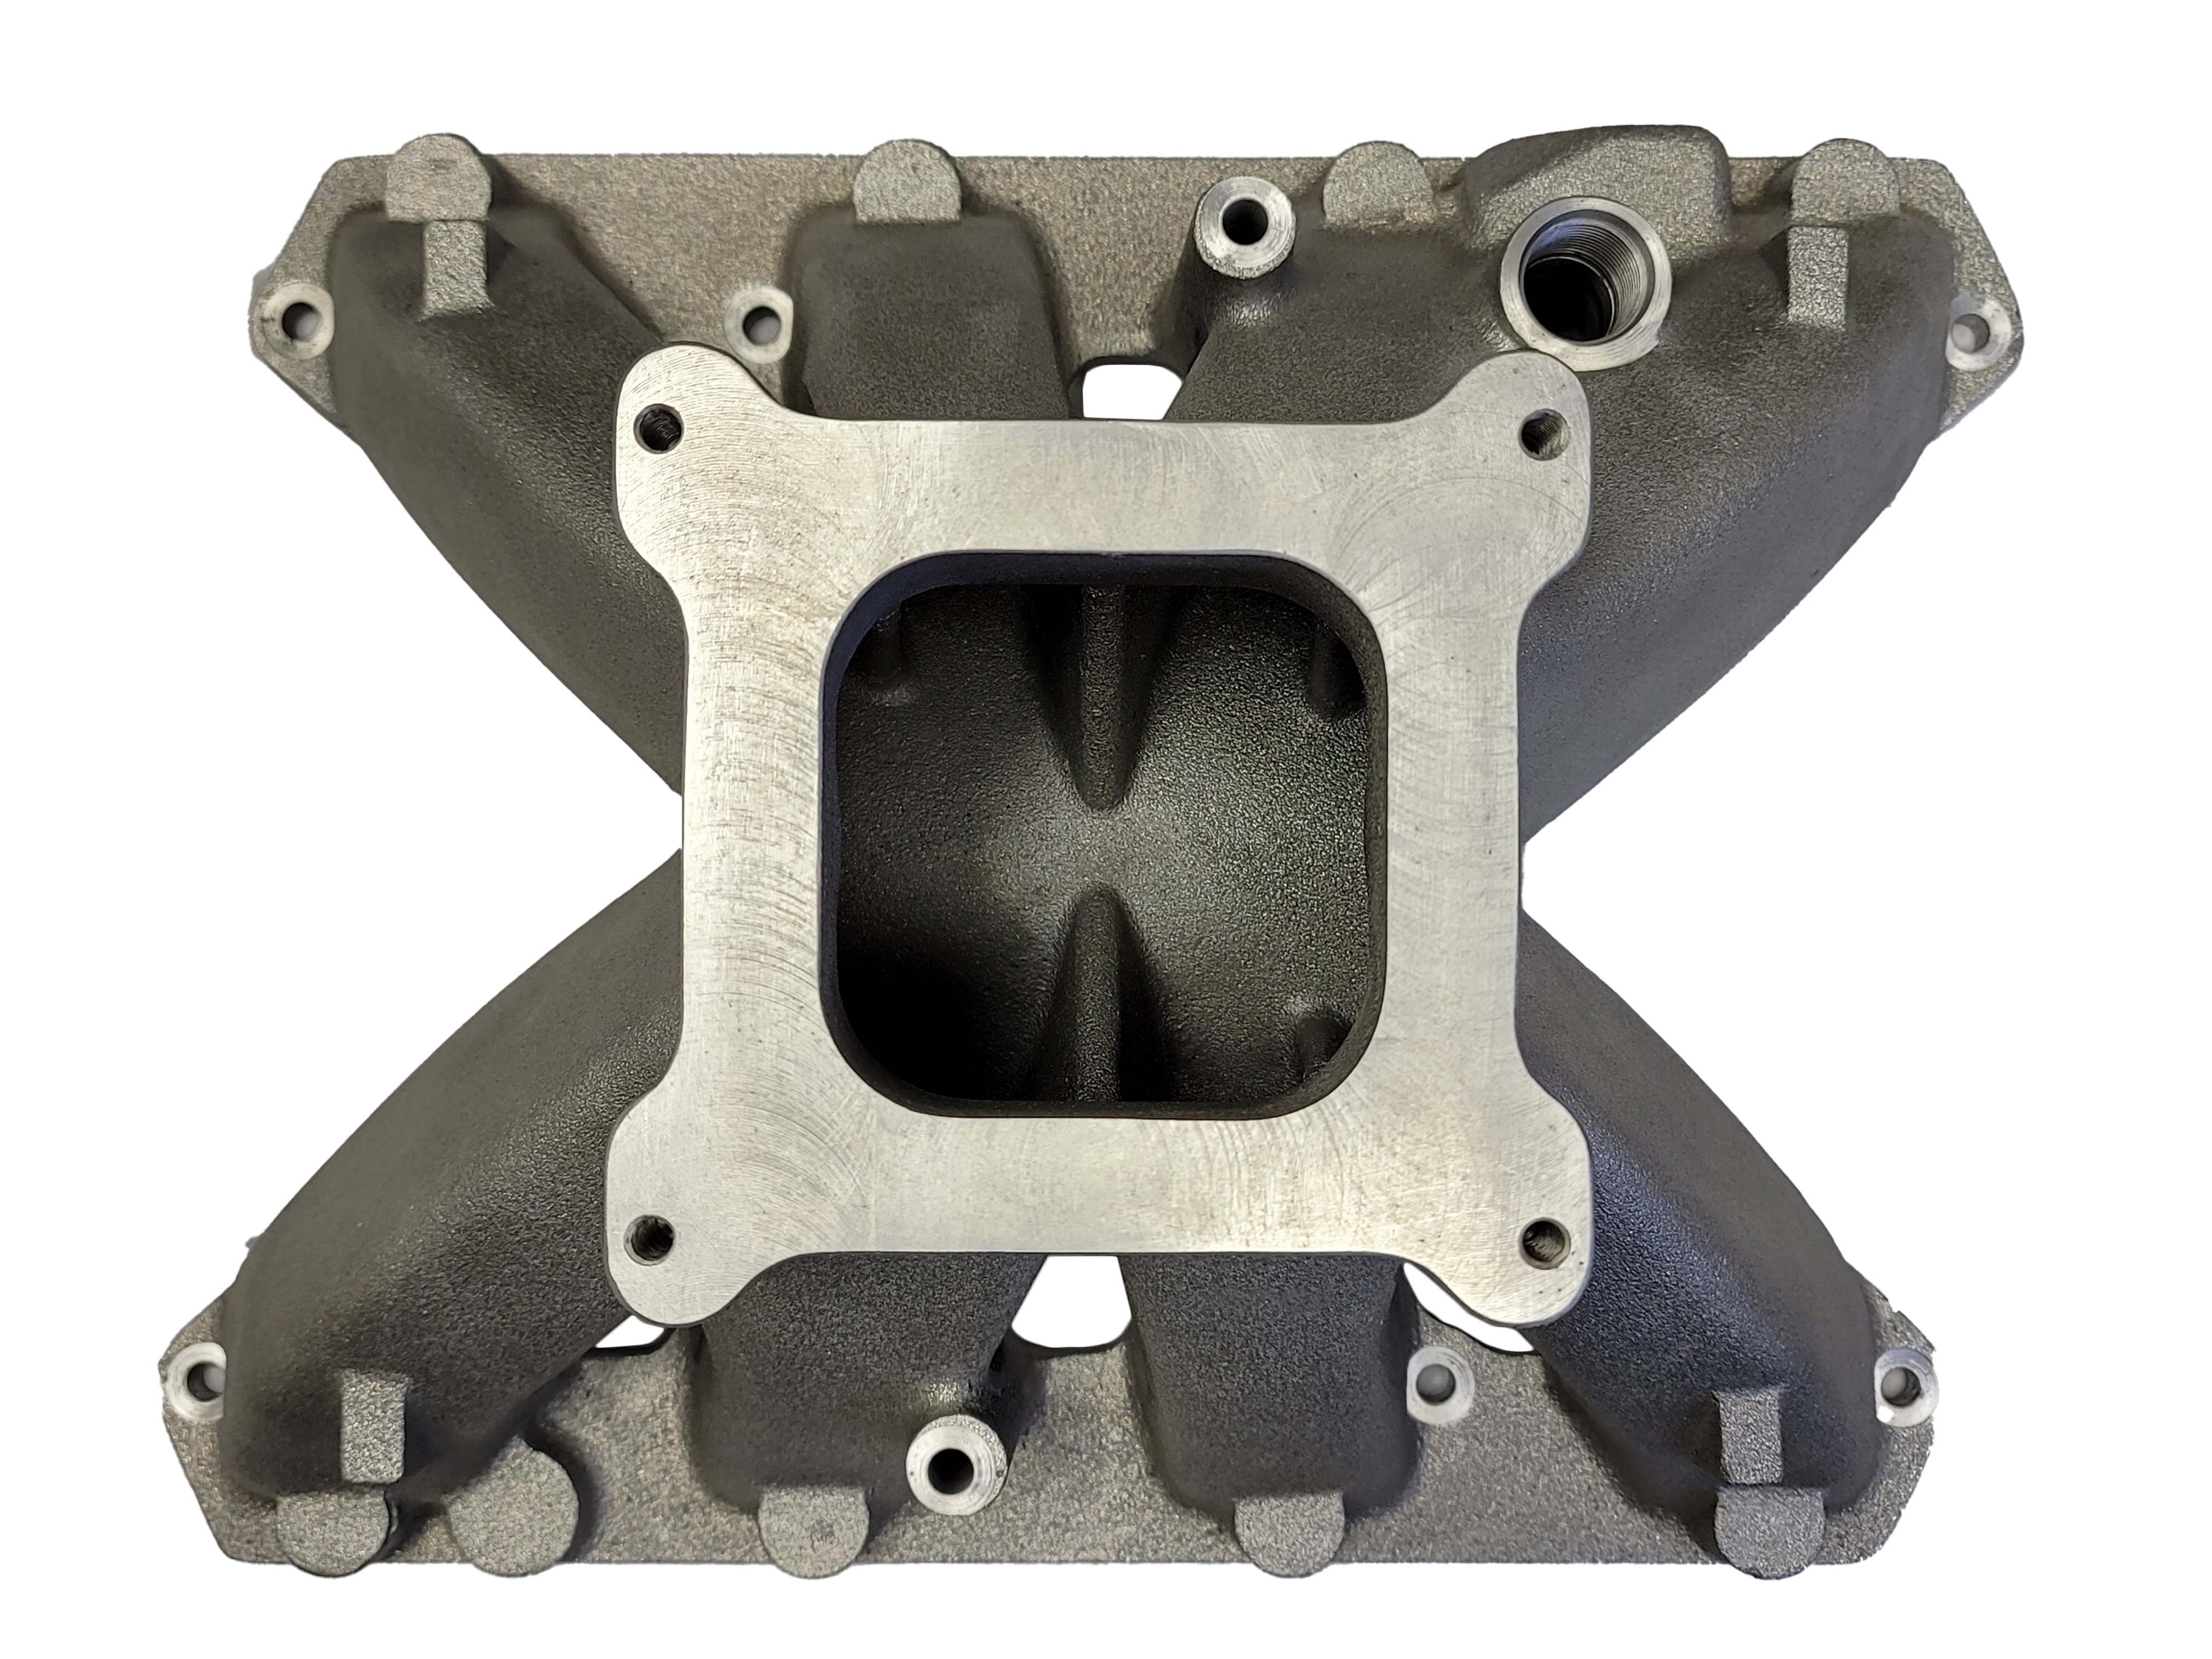 Performance Drag Pack Gen 3 Hemi Intake Manifold, Standard 4150 Opening with 2" Shorter Plenum (Comparable to MOPAR P5155288) Questions & Answers